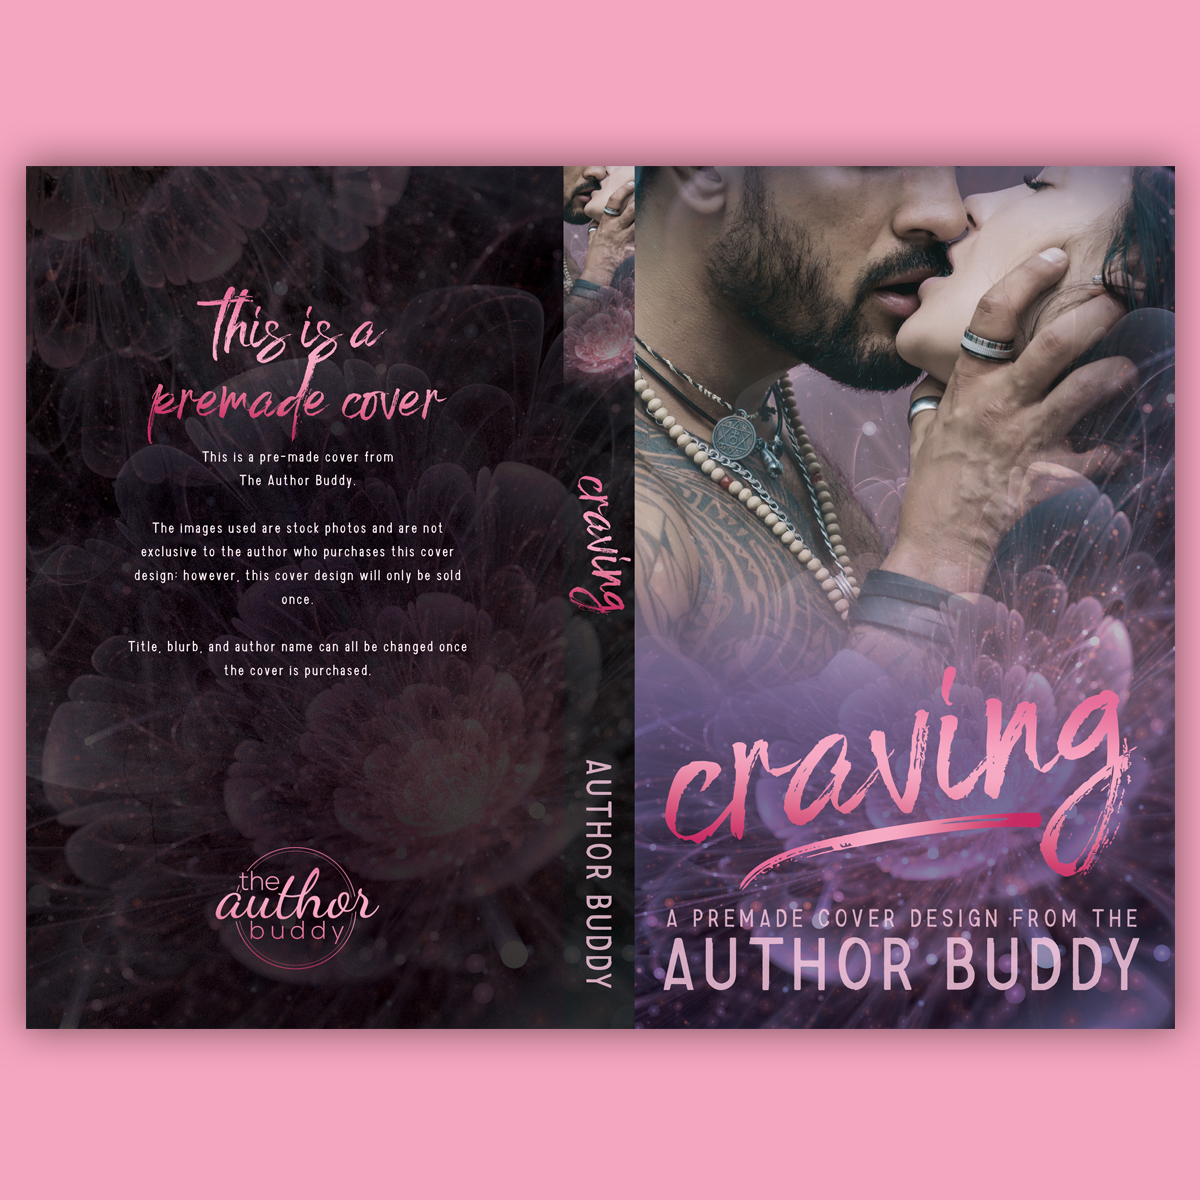 Craving - Premade Contemporary Steamy Dark Romance Book Cover from The Author Buddy